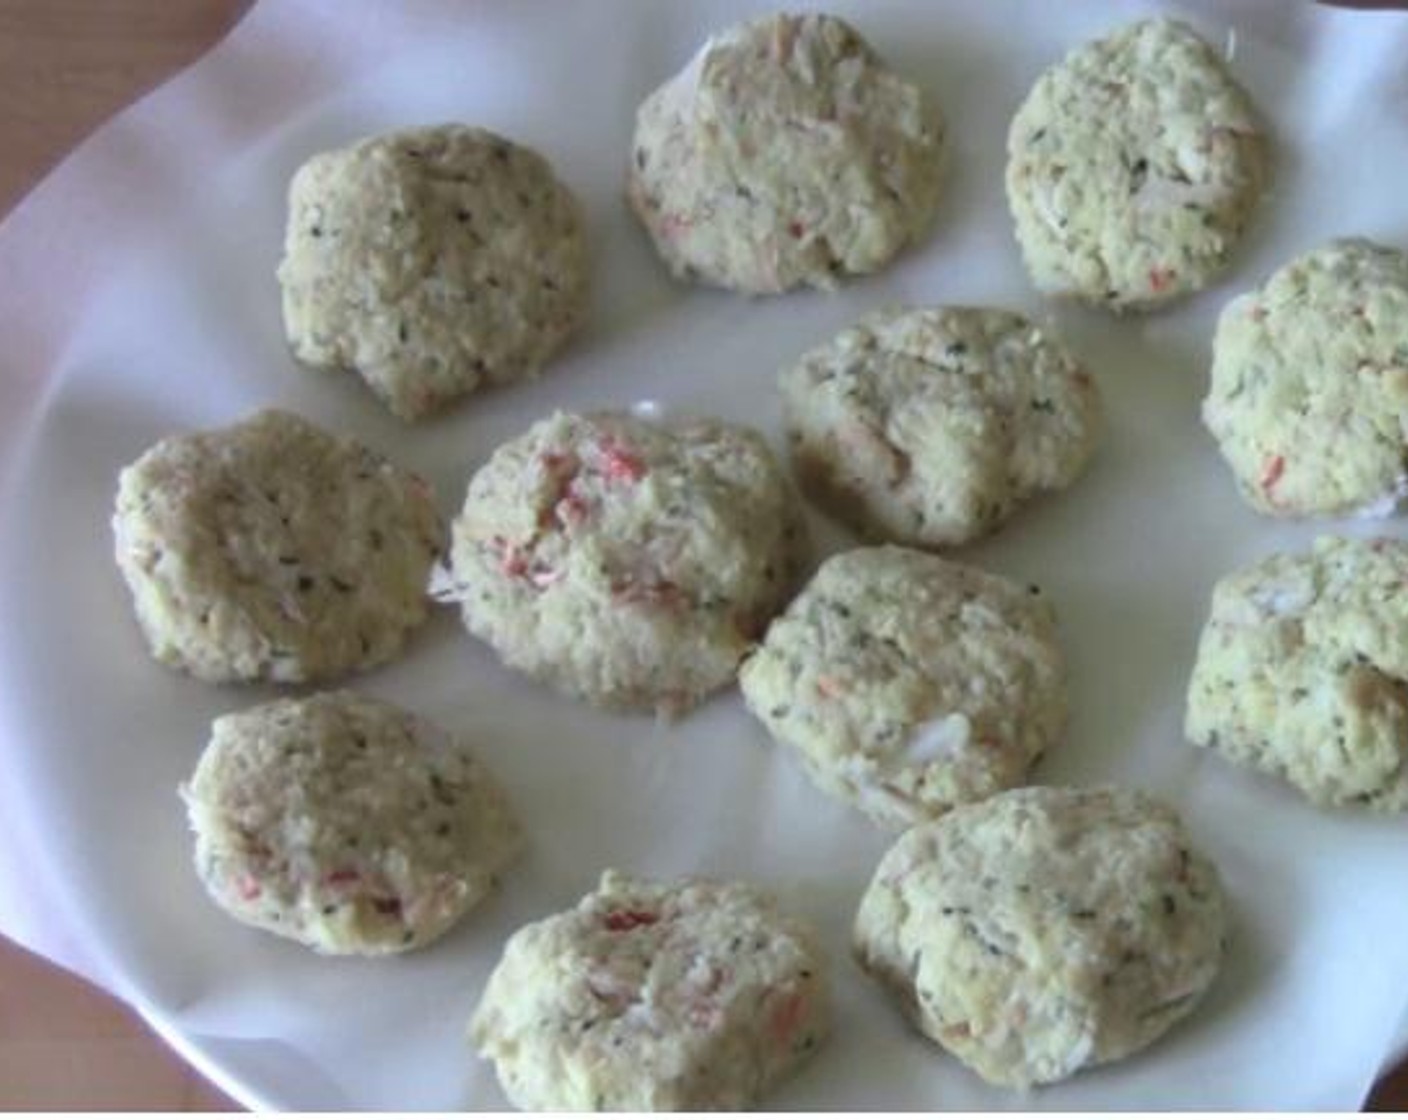 step 2 Into the same mixing bowl, also add the Fresh Crab Meat (2 cans), and Breadcrumbs (2 cups). Stir everything together. Shape the mixture into small patties and put them on a plate. Put the small patties inside a fridge for about 20 minutes